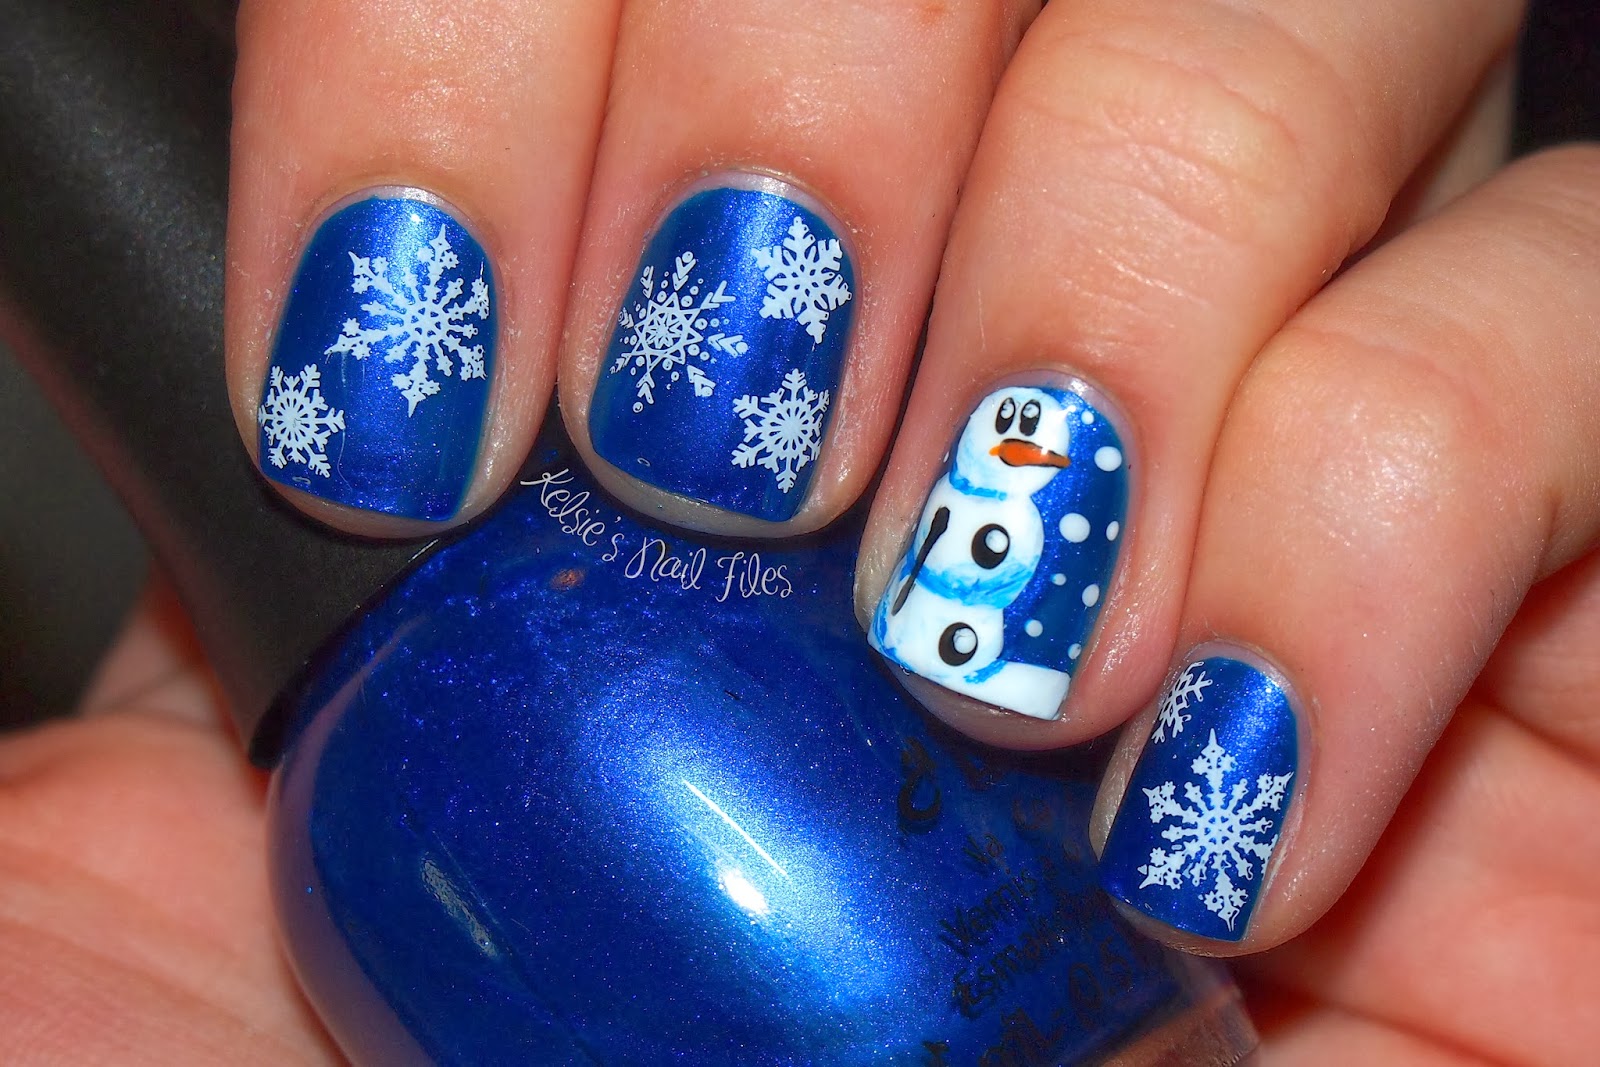 2. Winter Nail Designs for January - wide 1